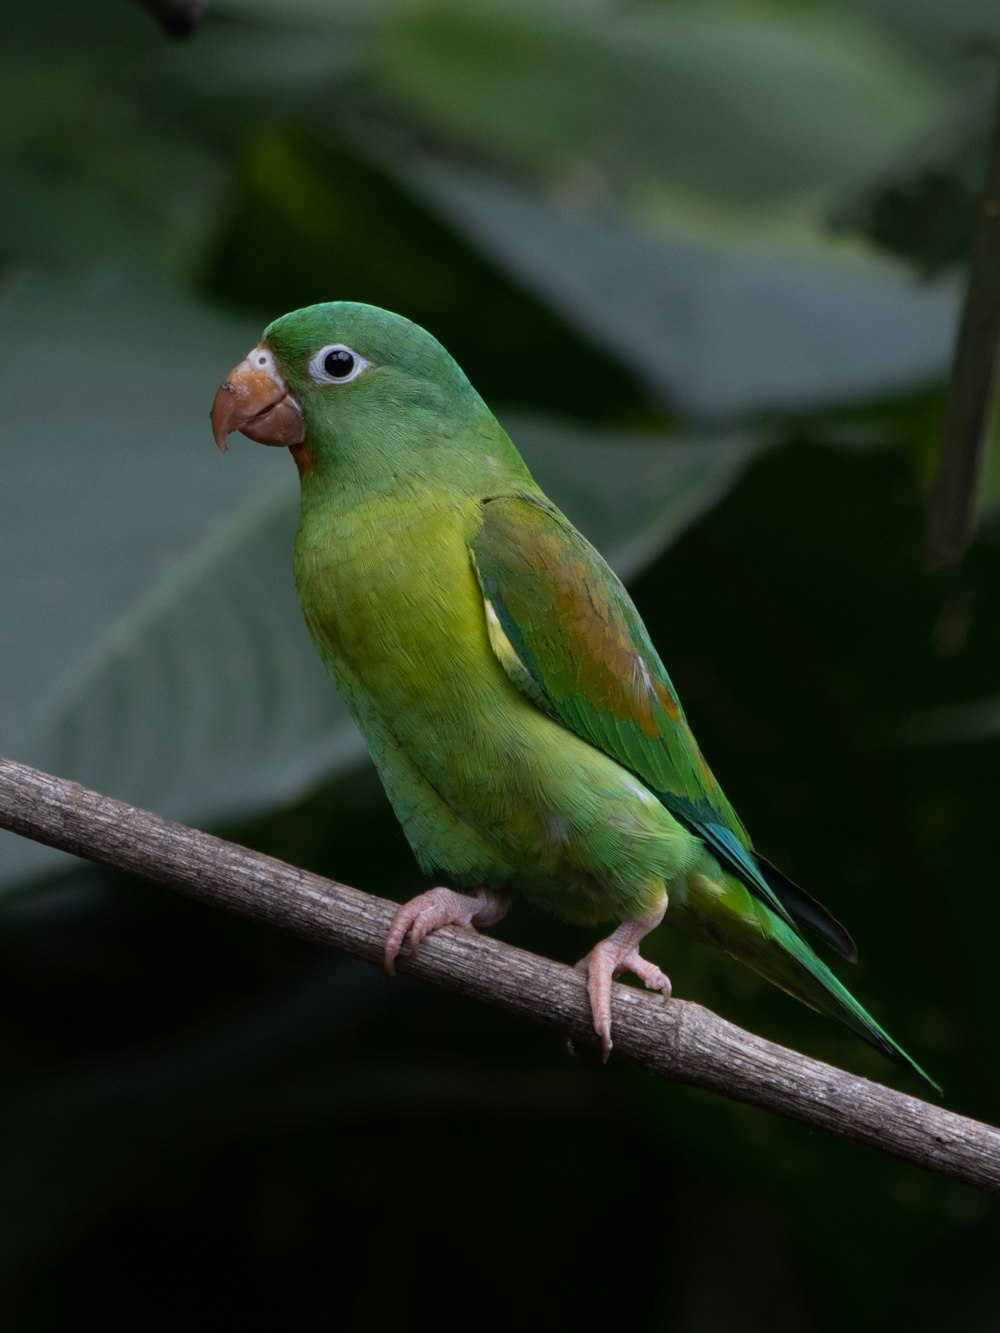 a green bird is perched on a branch